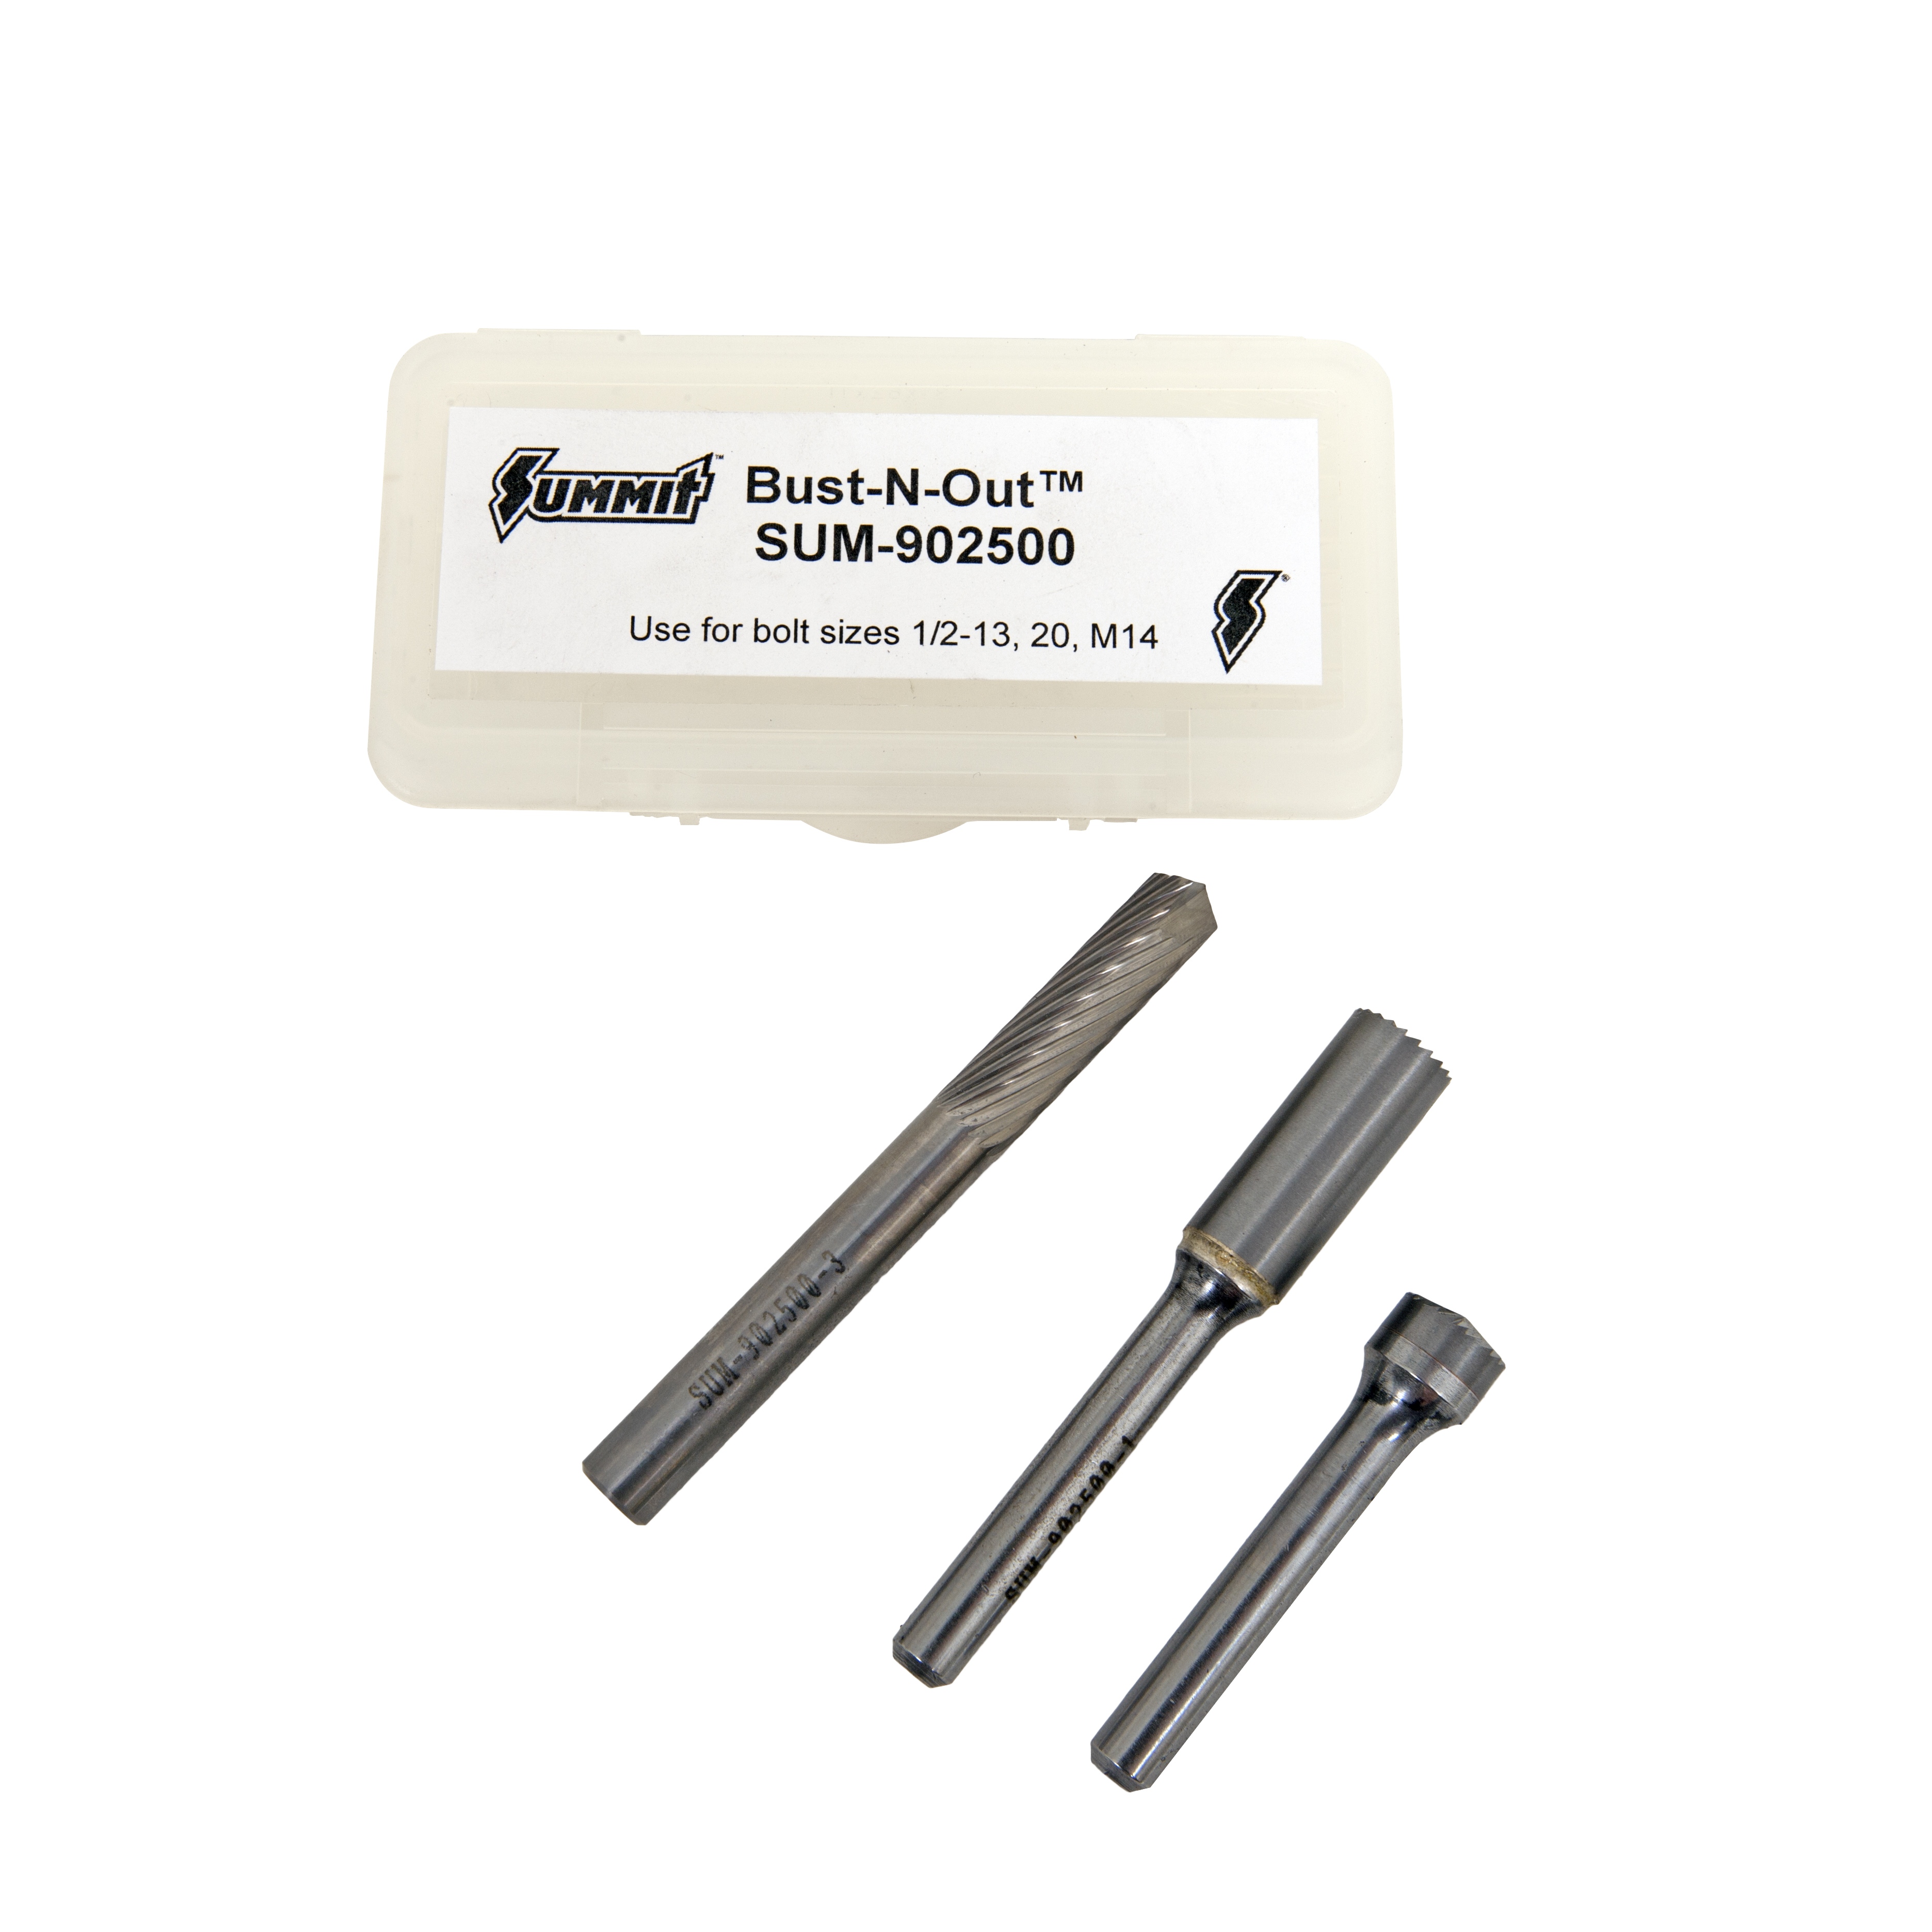 Summit Racing Bust-N-Out™ Bolt Removal Tool for 1/2" and 14mm Fasteners